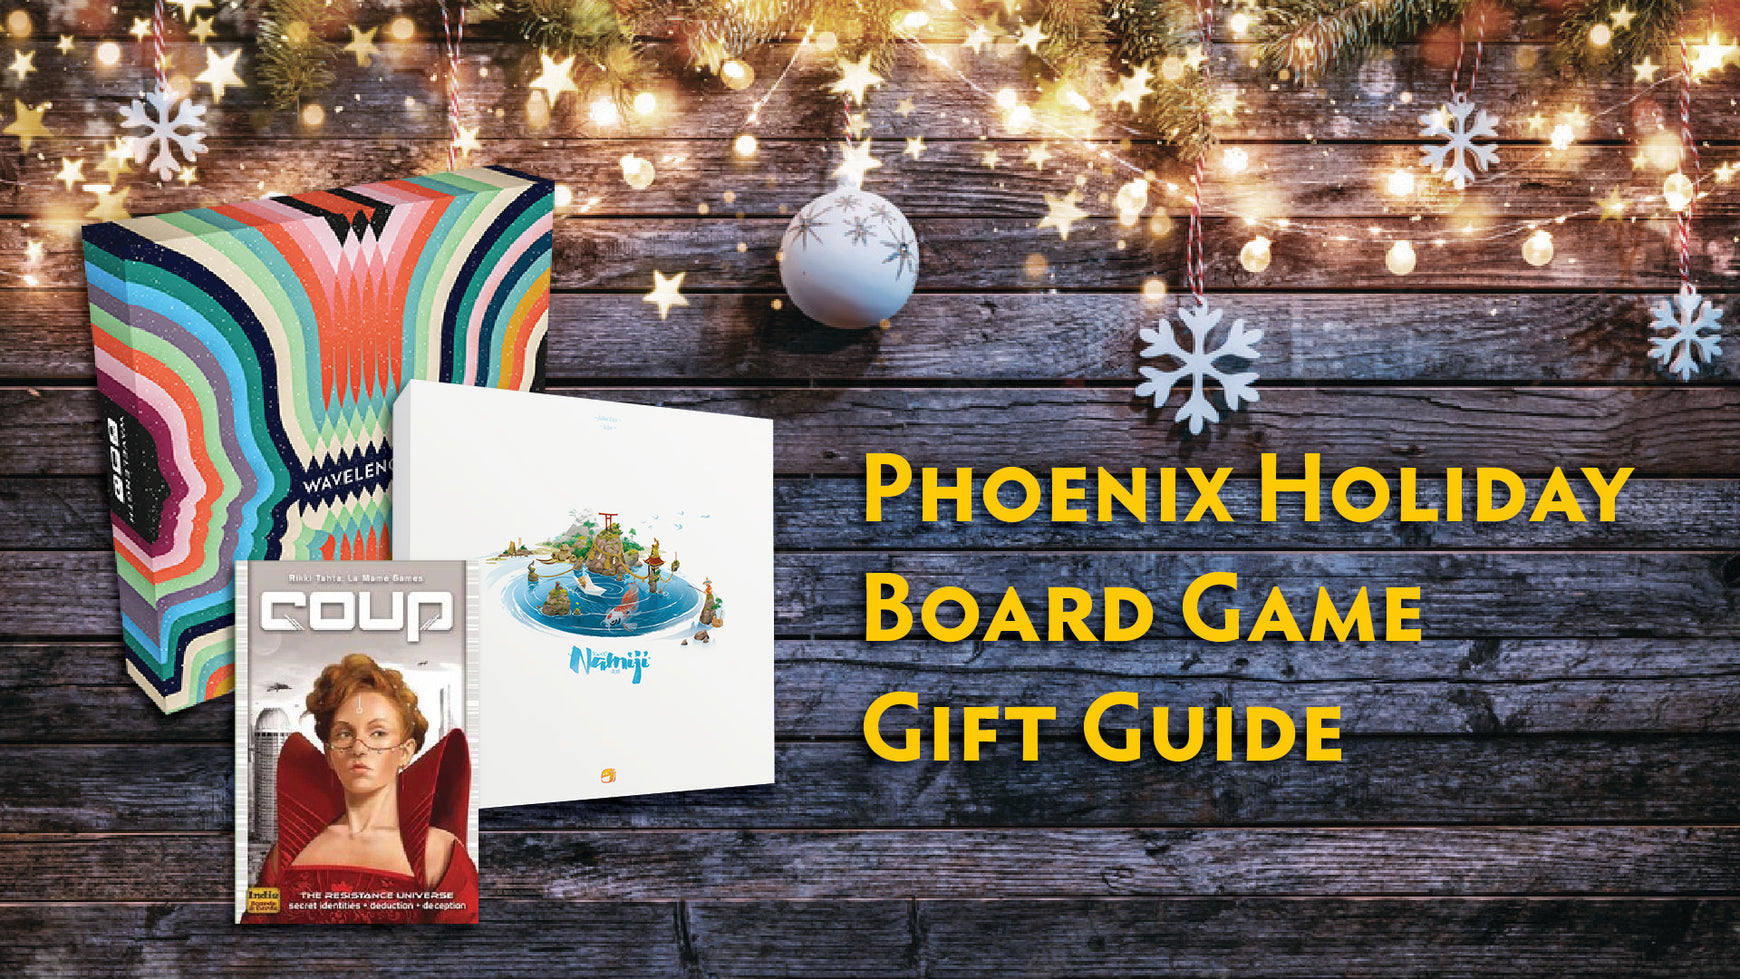 Phoenix Board Game Holiday Gift Guide!